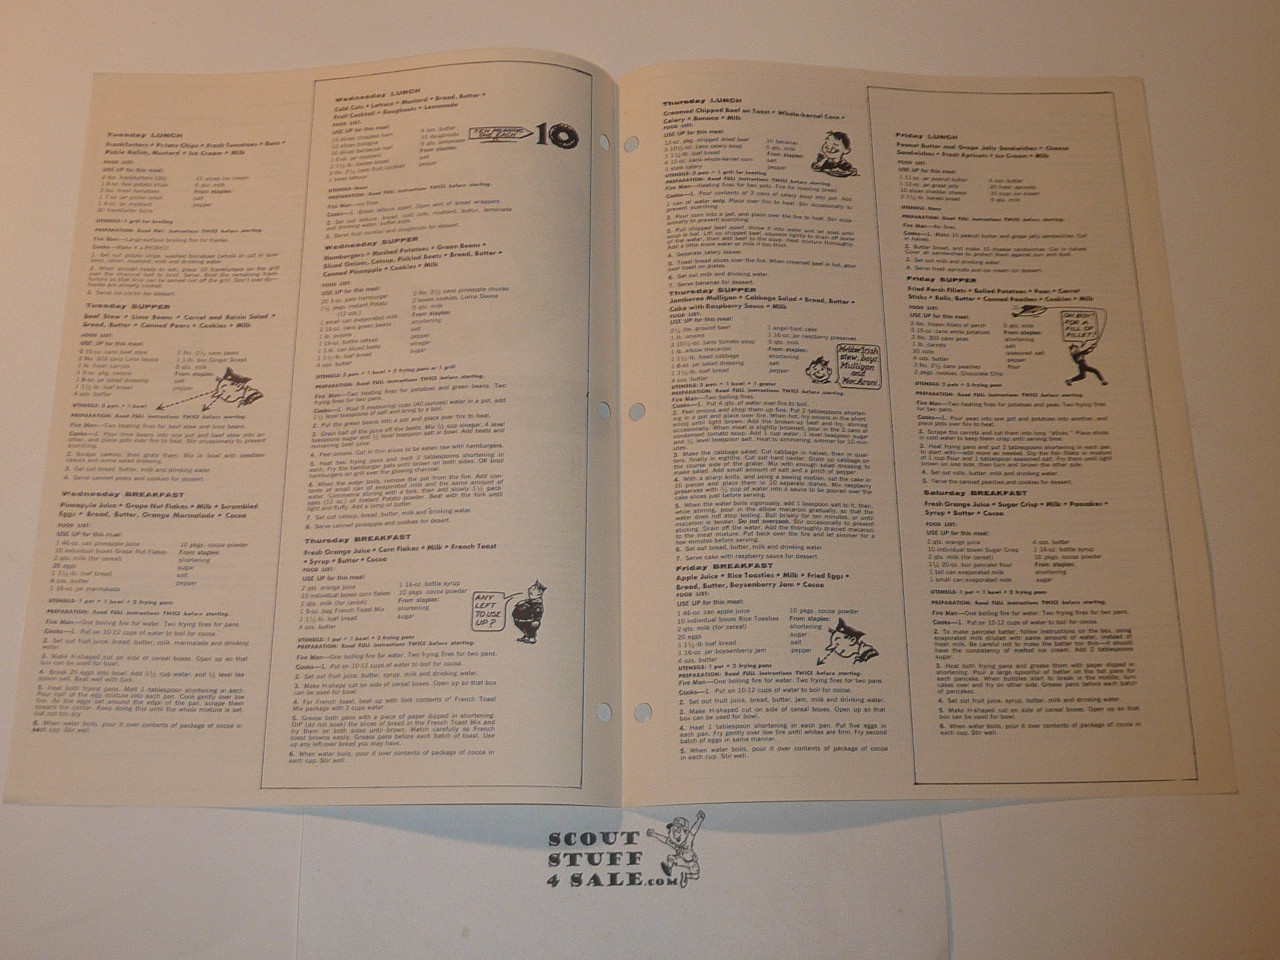 Jamboree Patrol Menus, By Green Bar Bill, Boys' Life Single Topic Reprint from the 1950's - 1960's , written for Scouts, great teaching materials